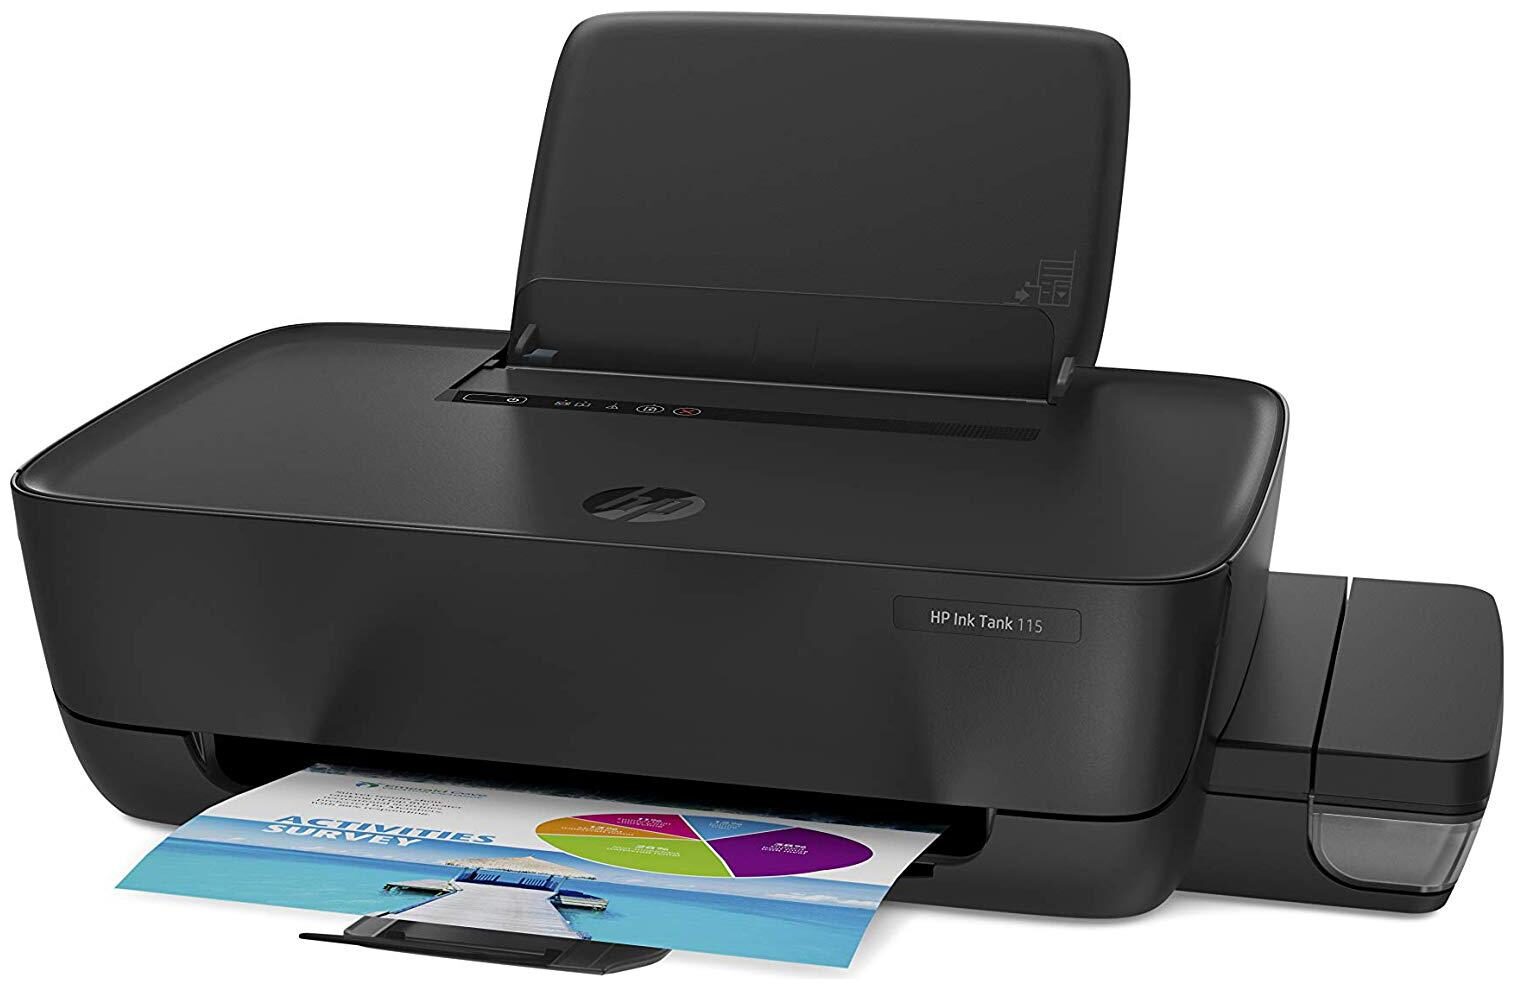 HP 115 | Best Printer for Home Use